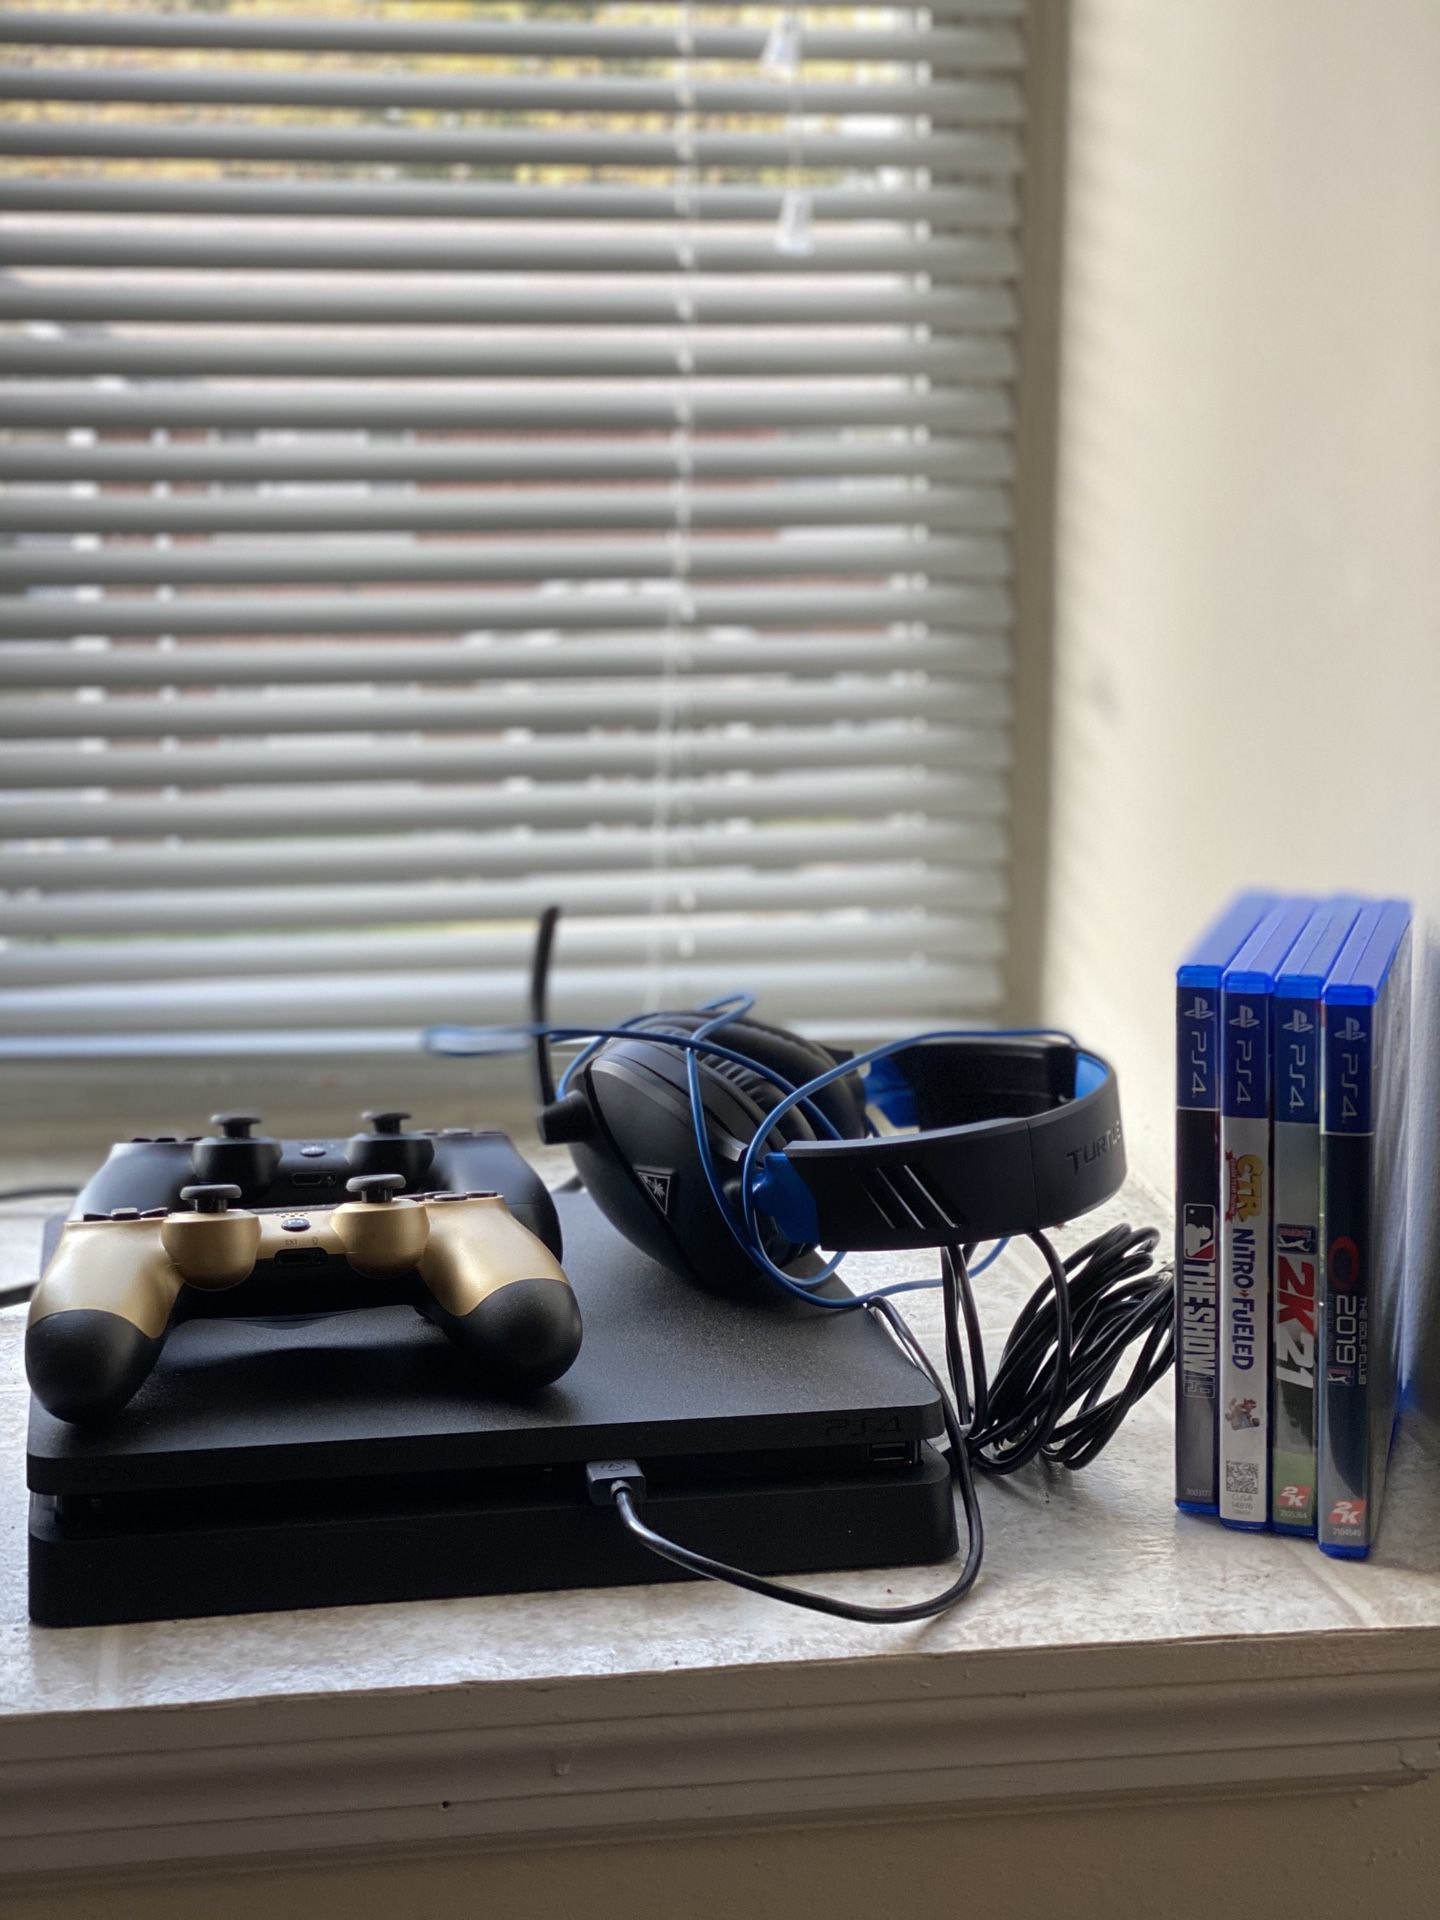 PS4 with headset, games, and controllers.